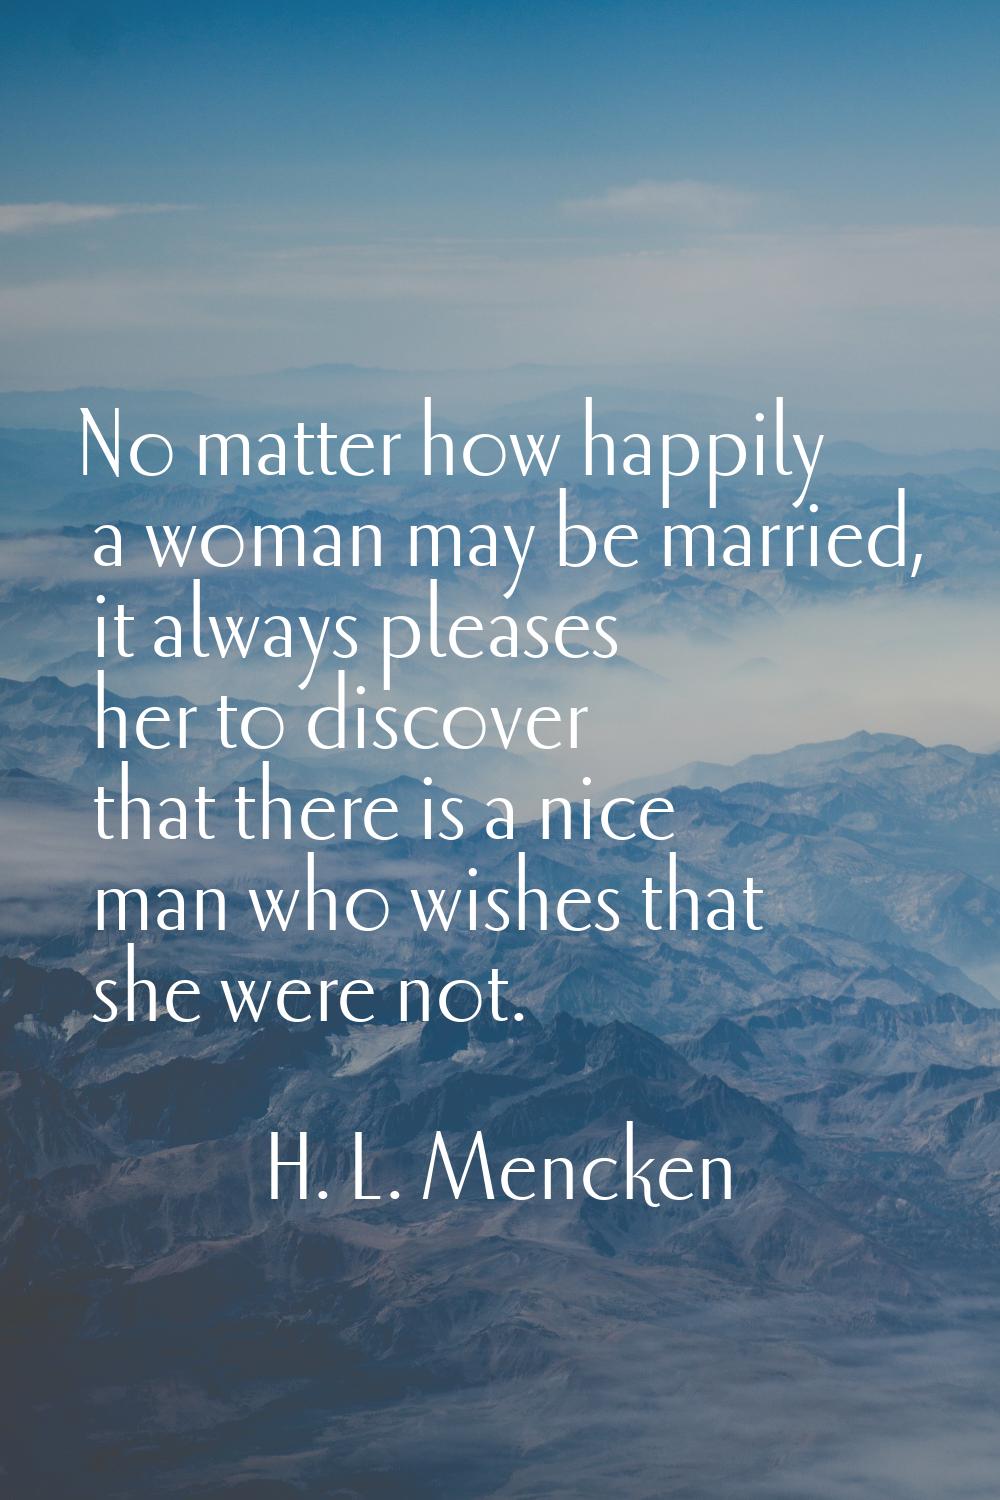 No matter how happily a woman may be married, it always pleases her to discover that there is a nic